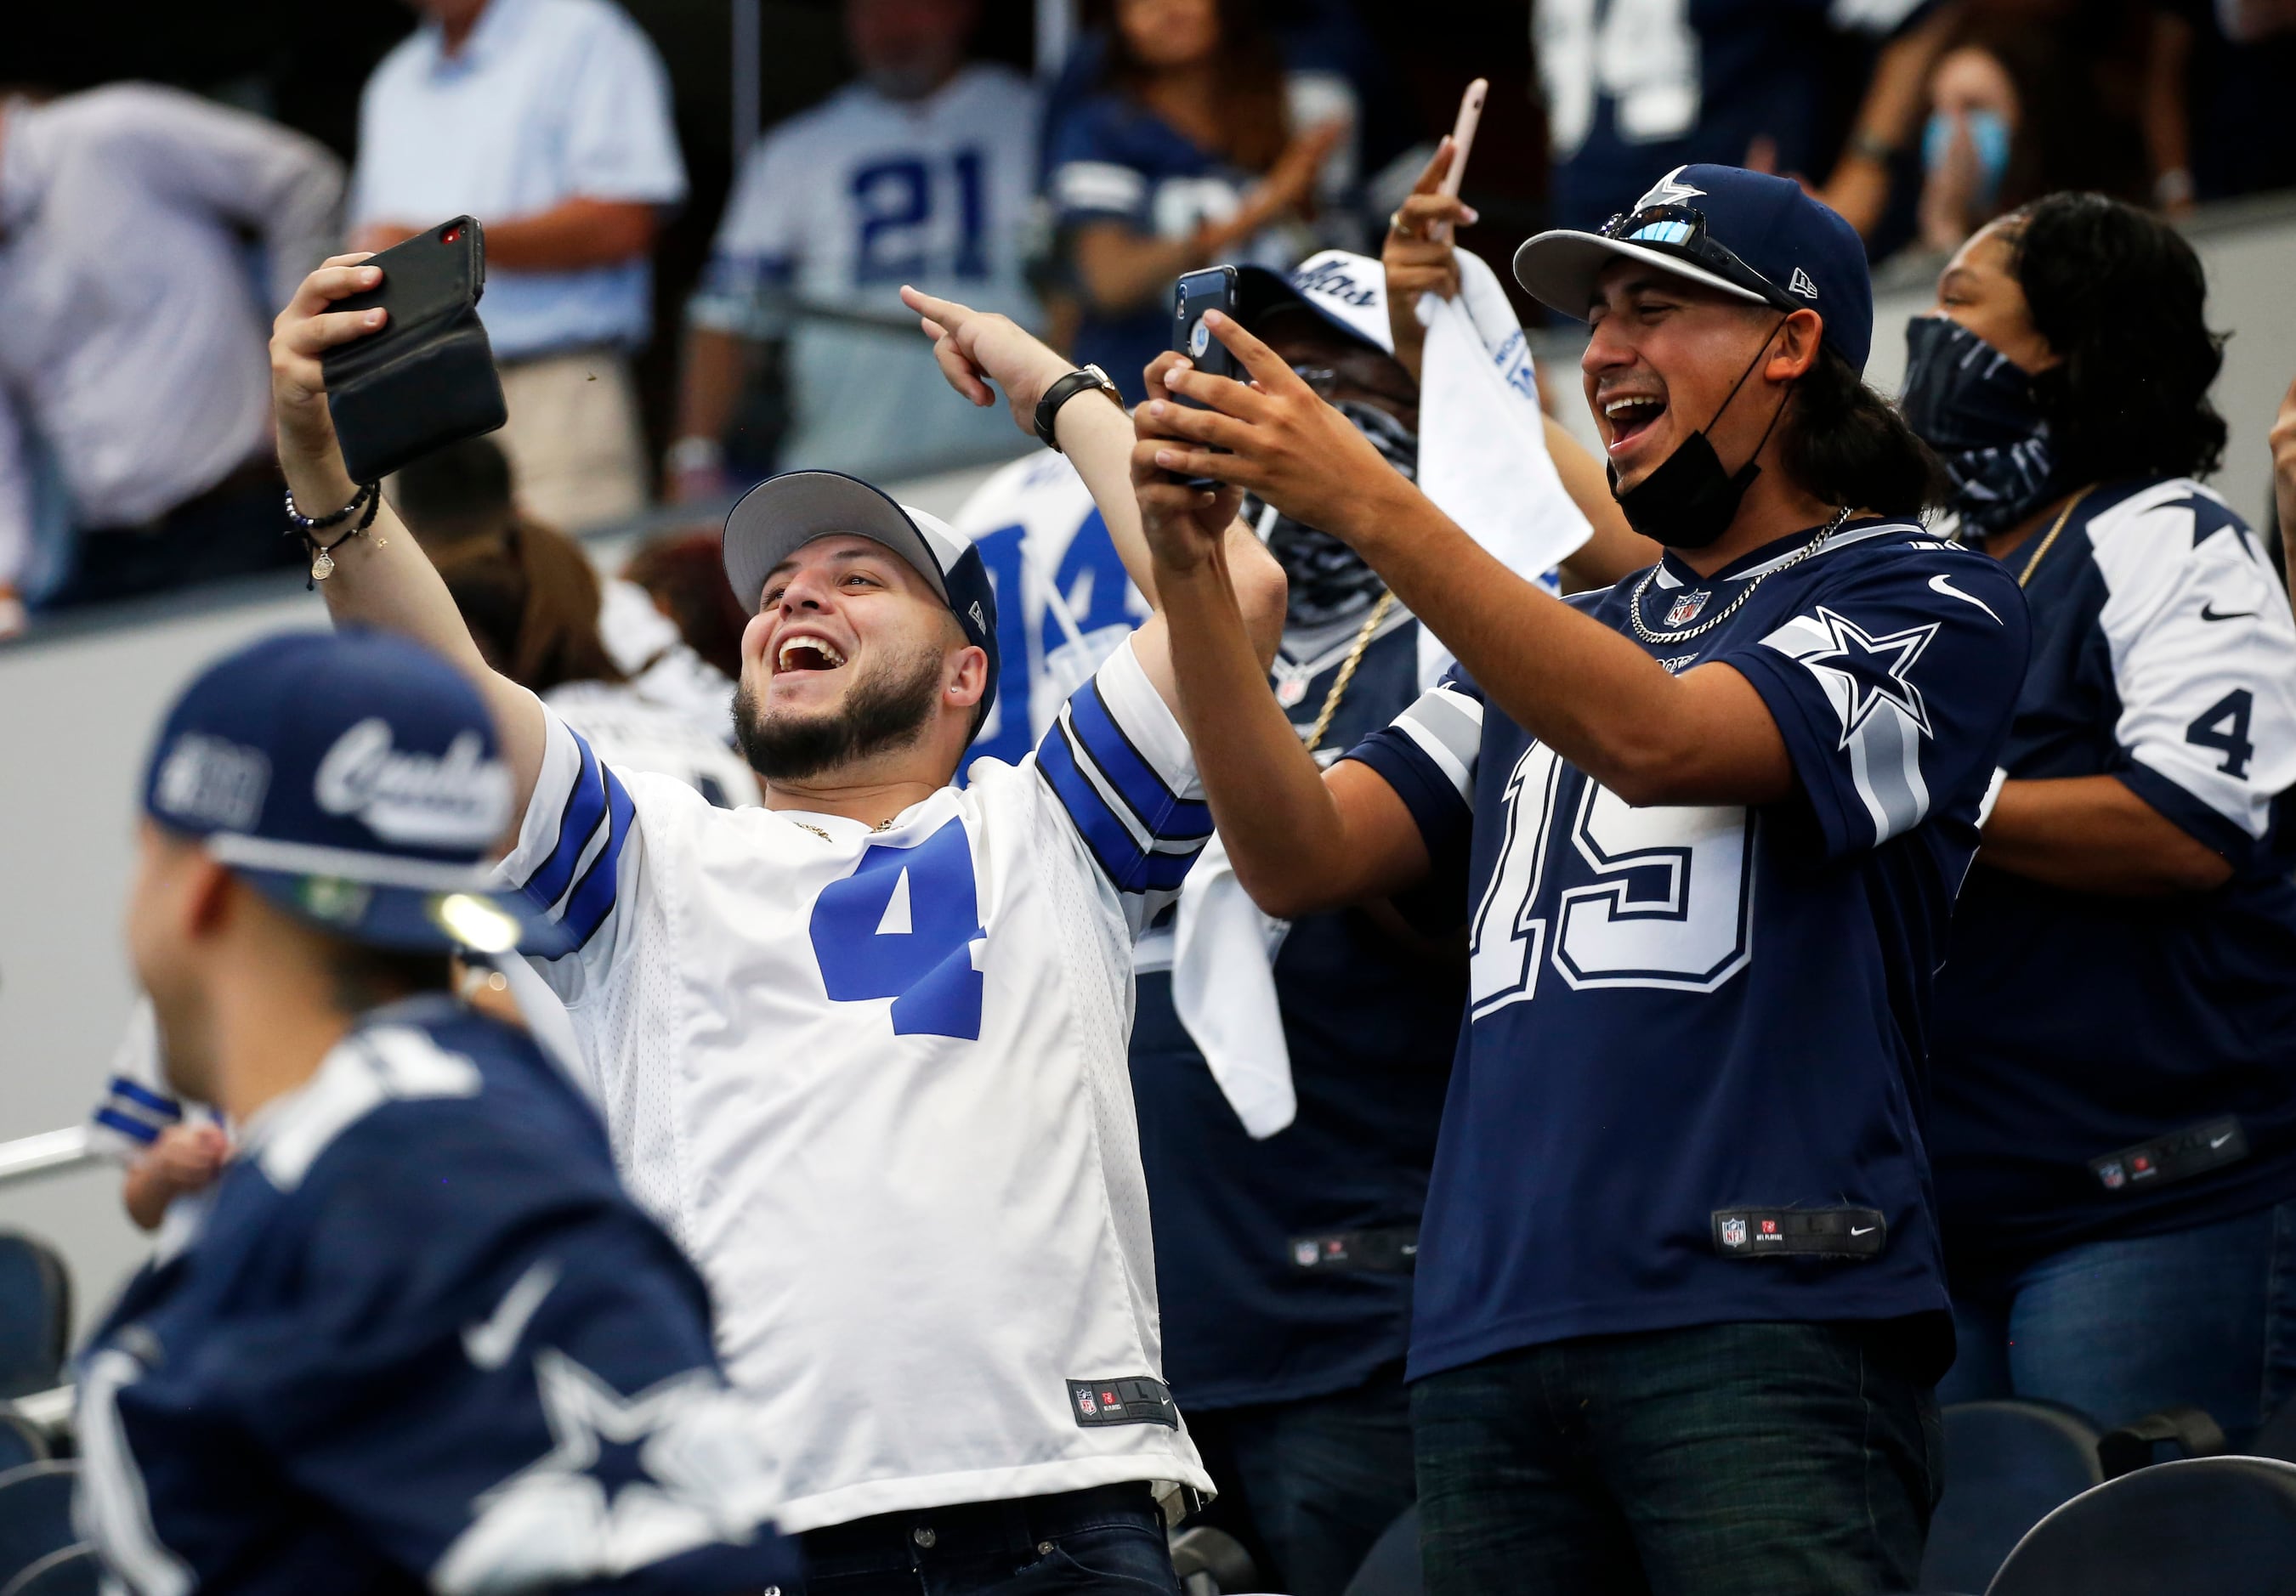 What was it like attending Cowboys' home opener? COVID-19 safety measures  couldn't contain fans' comeback passions.